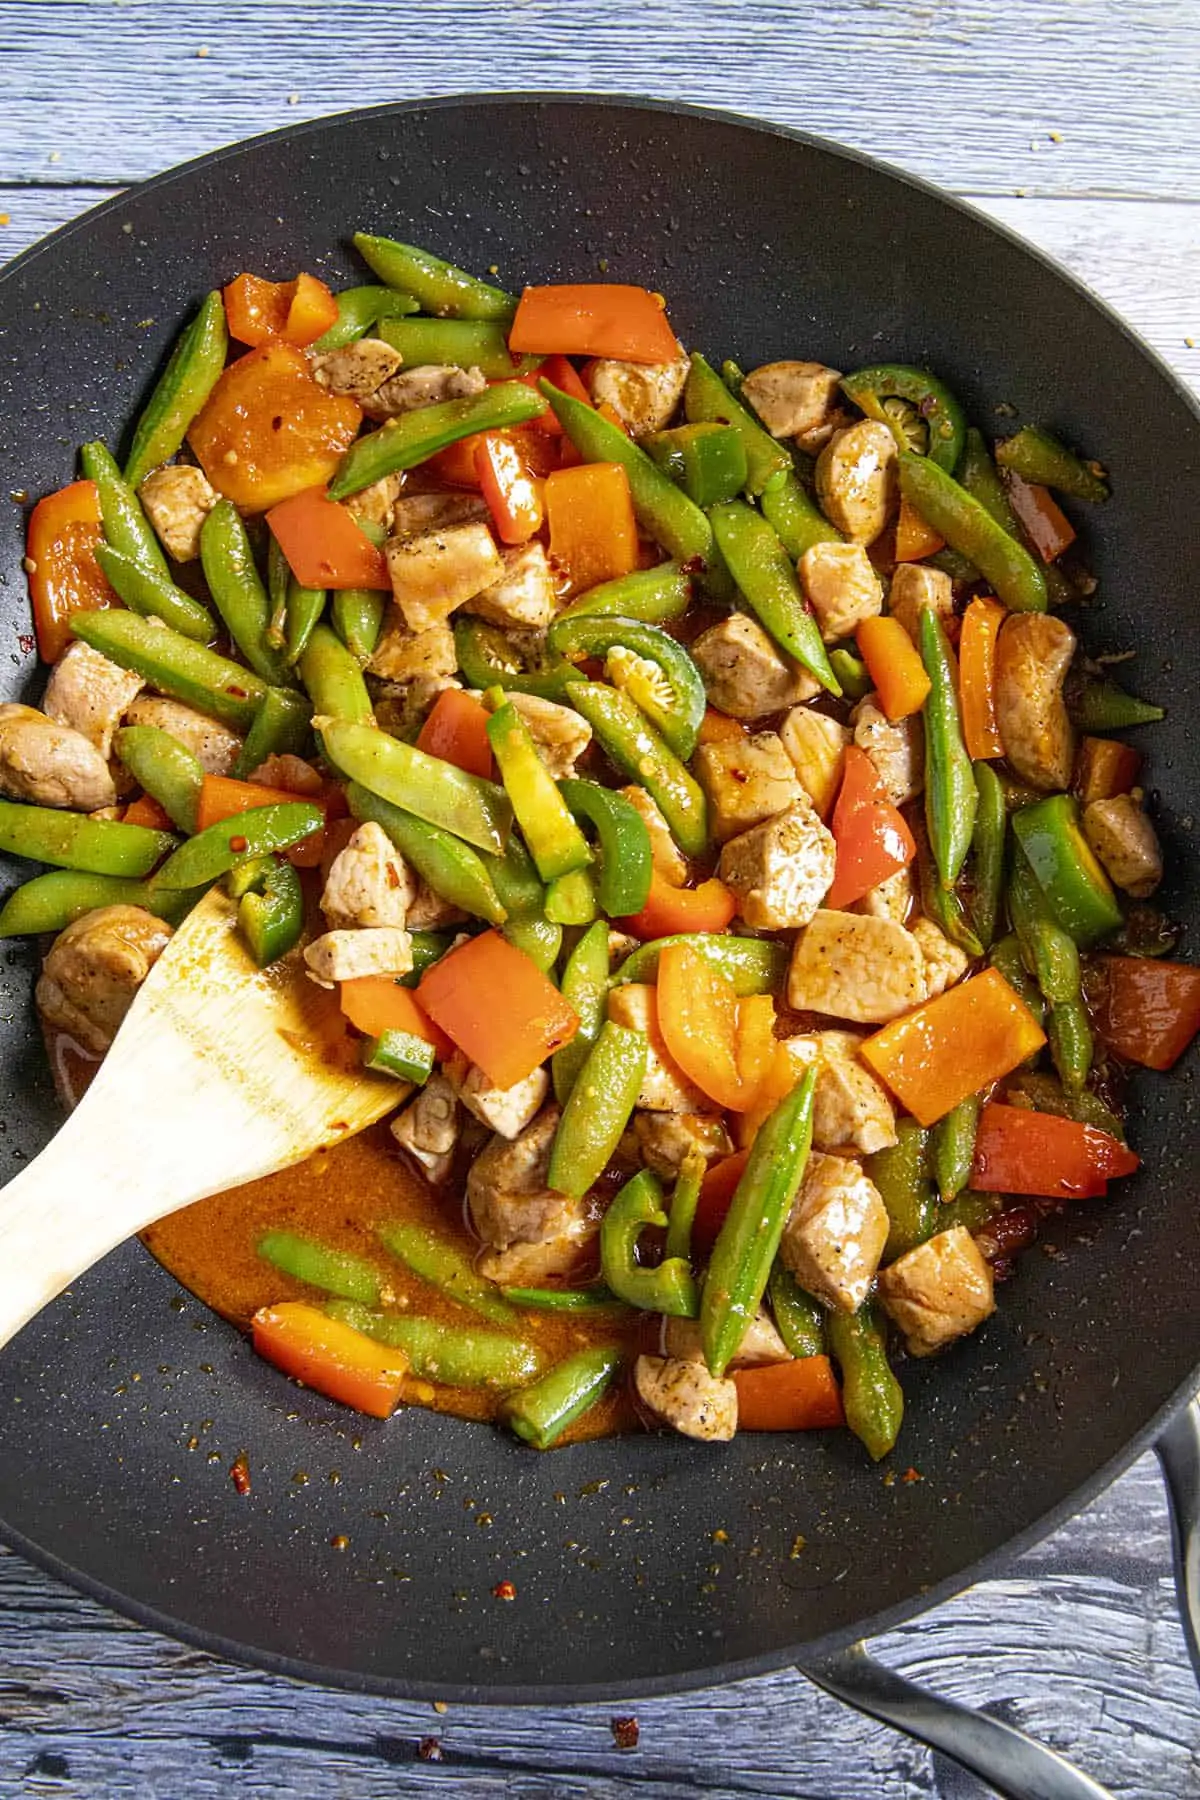 Stirring the stir fry sauce into the pan with the pork and vegetables